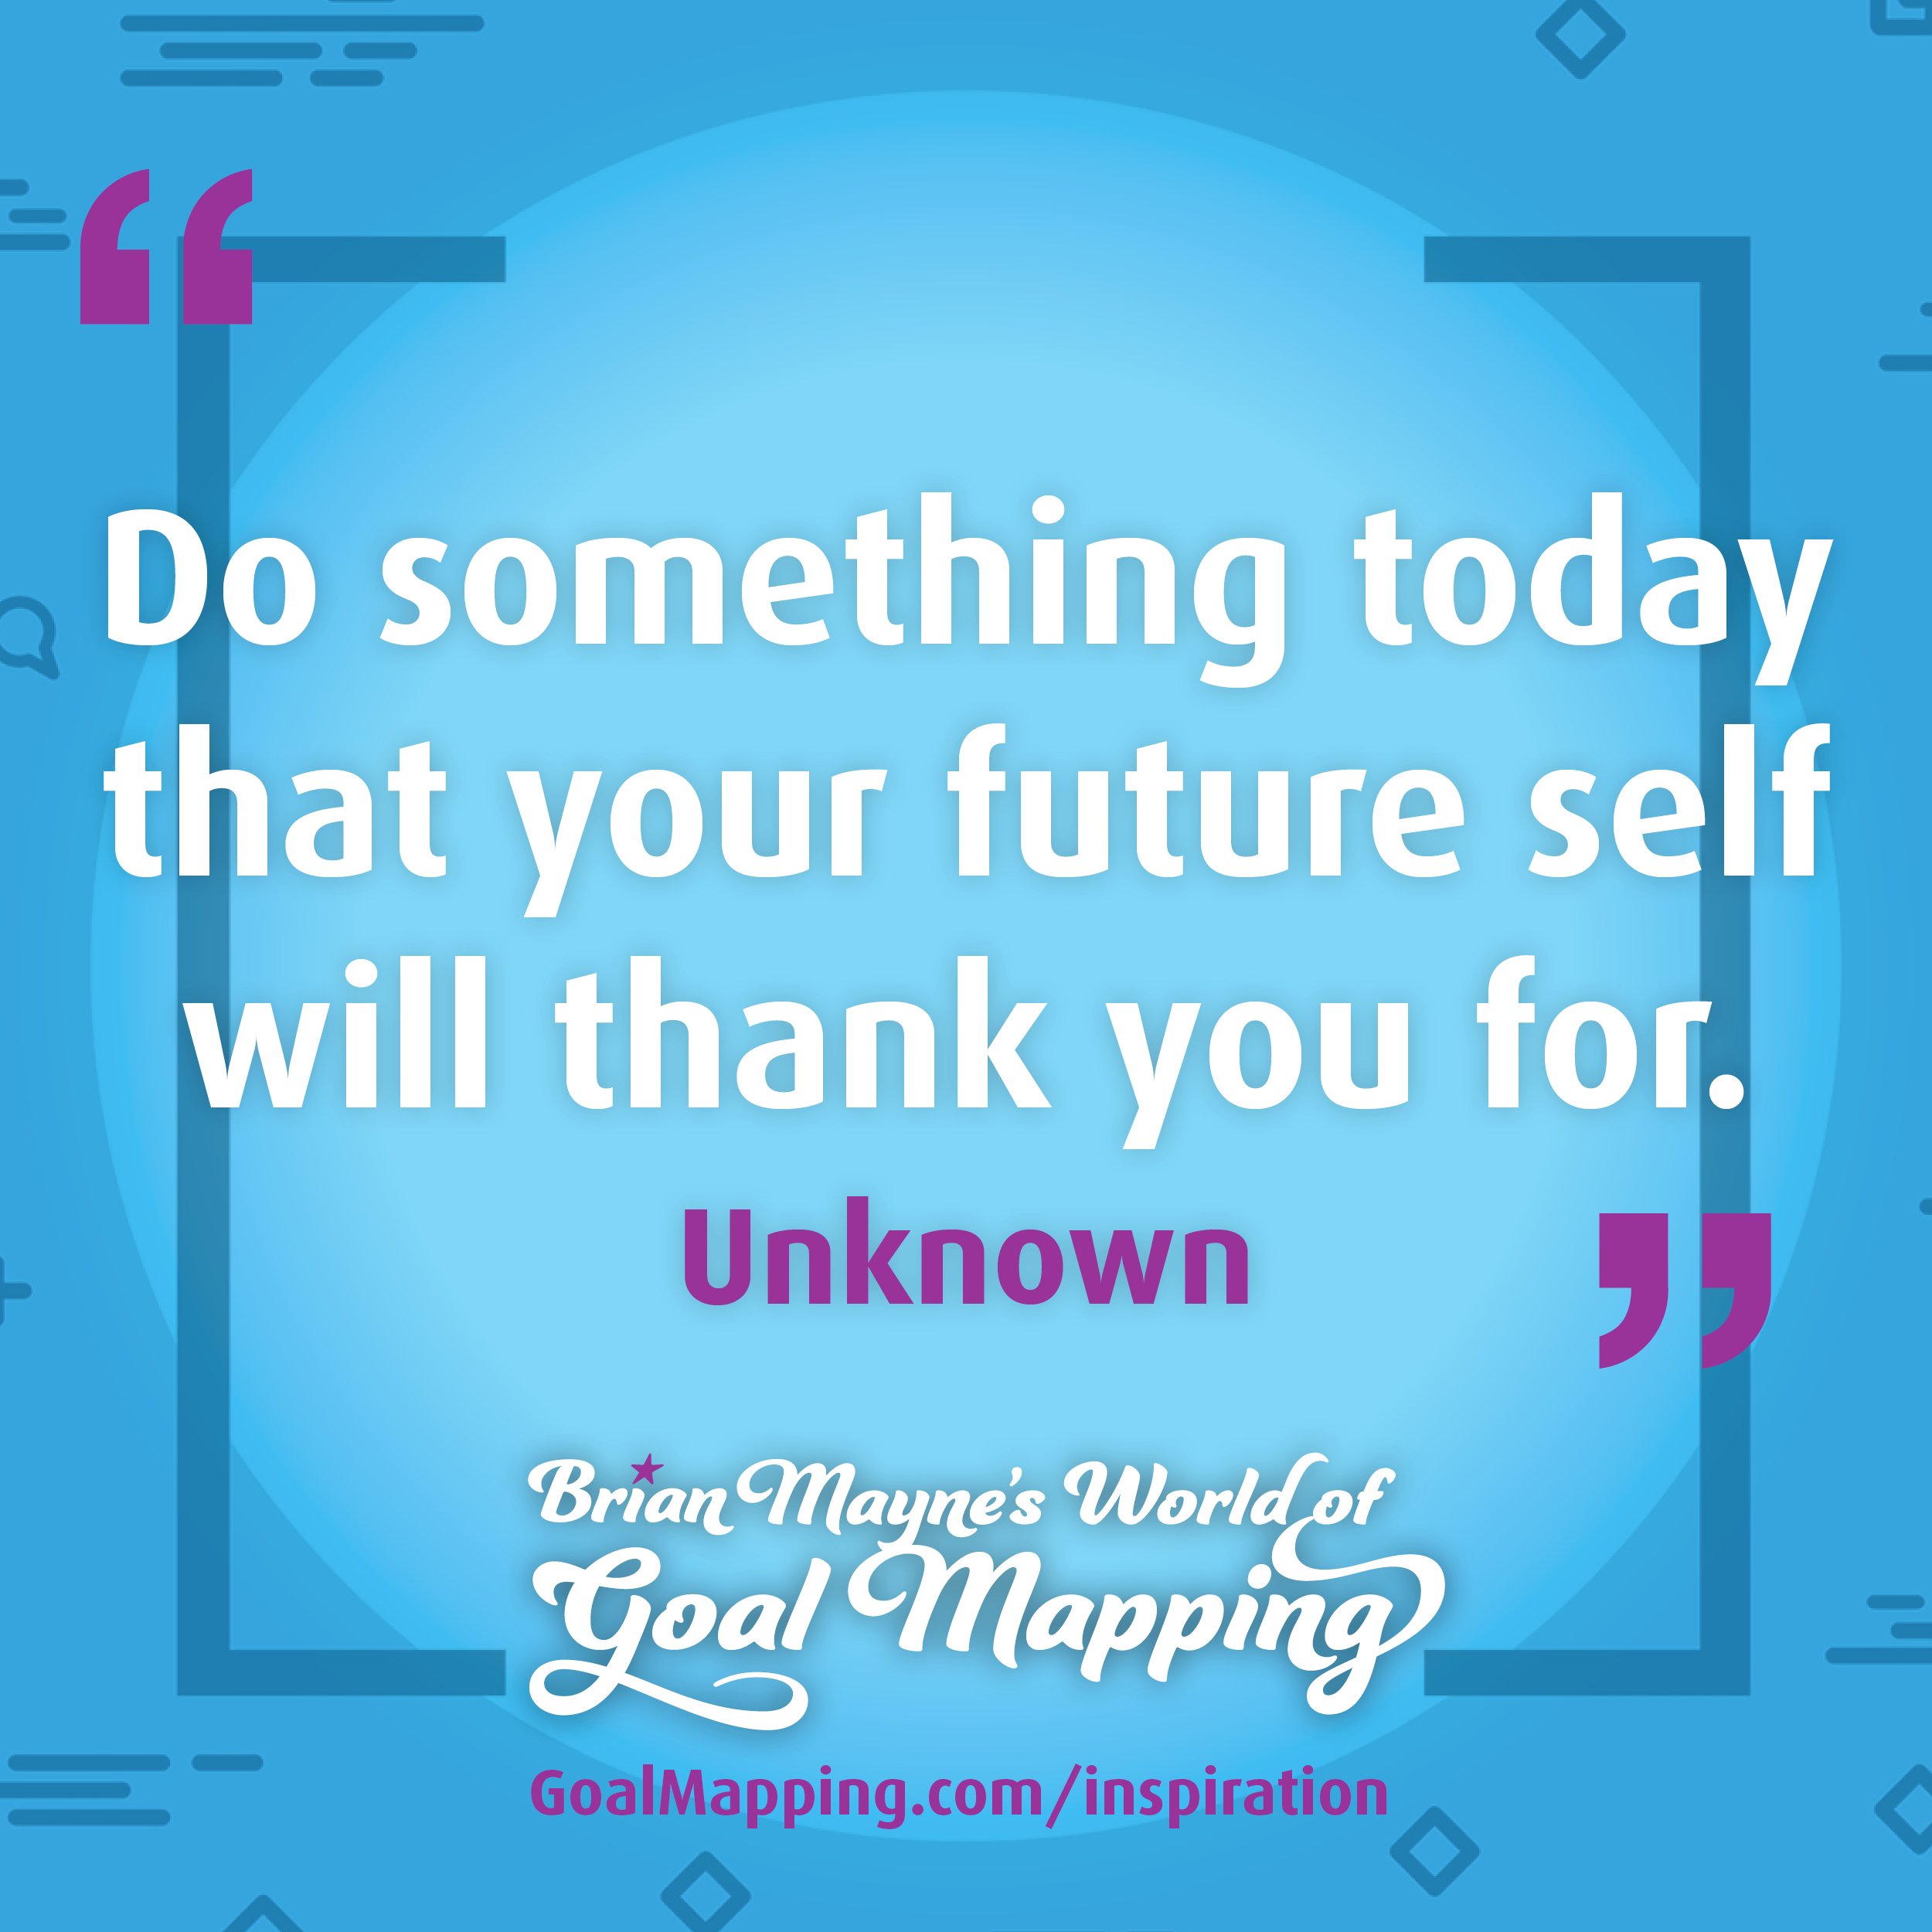 "Do something today that your future self will thank you for." Unknown